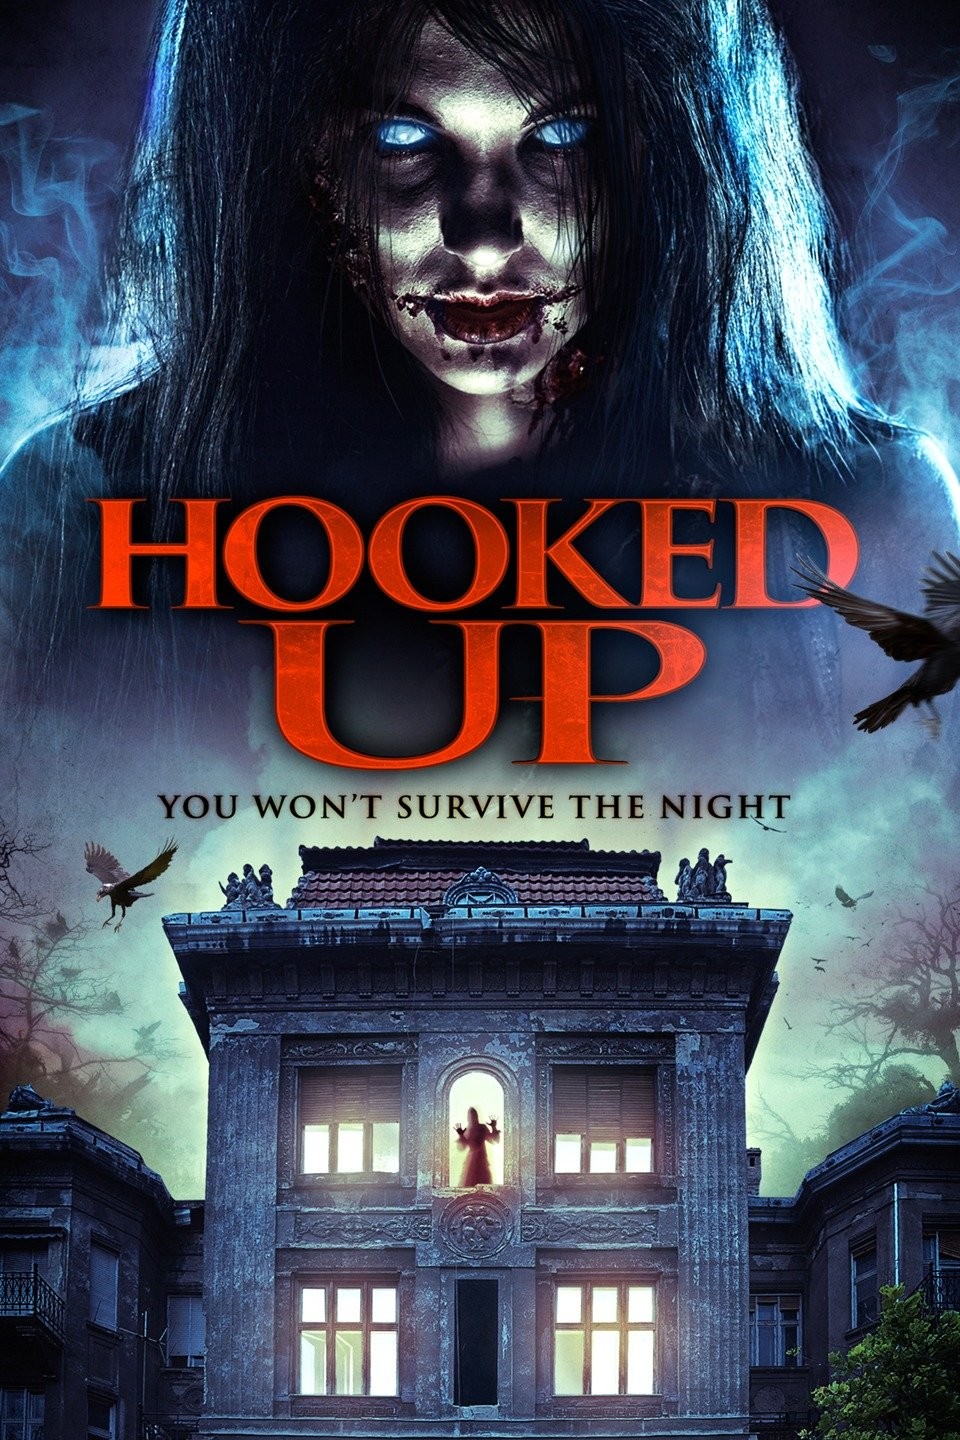 Hooked on You (film) - Wikipedia